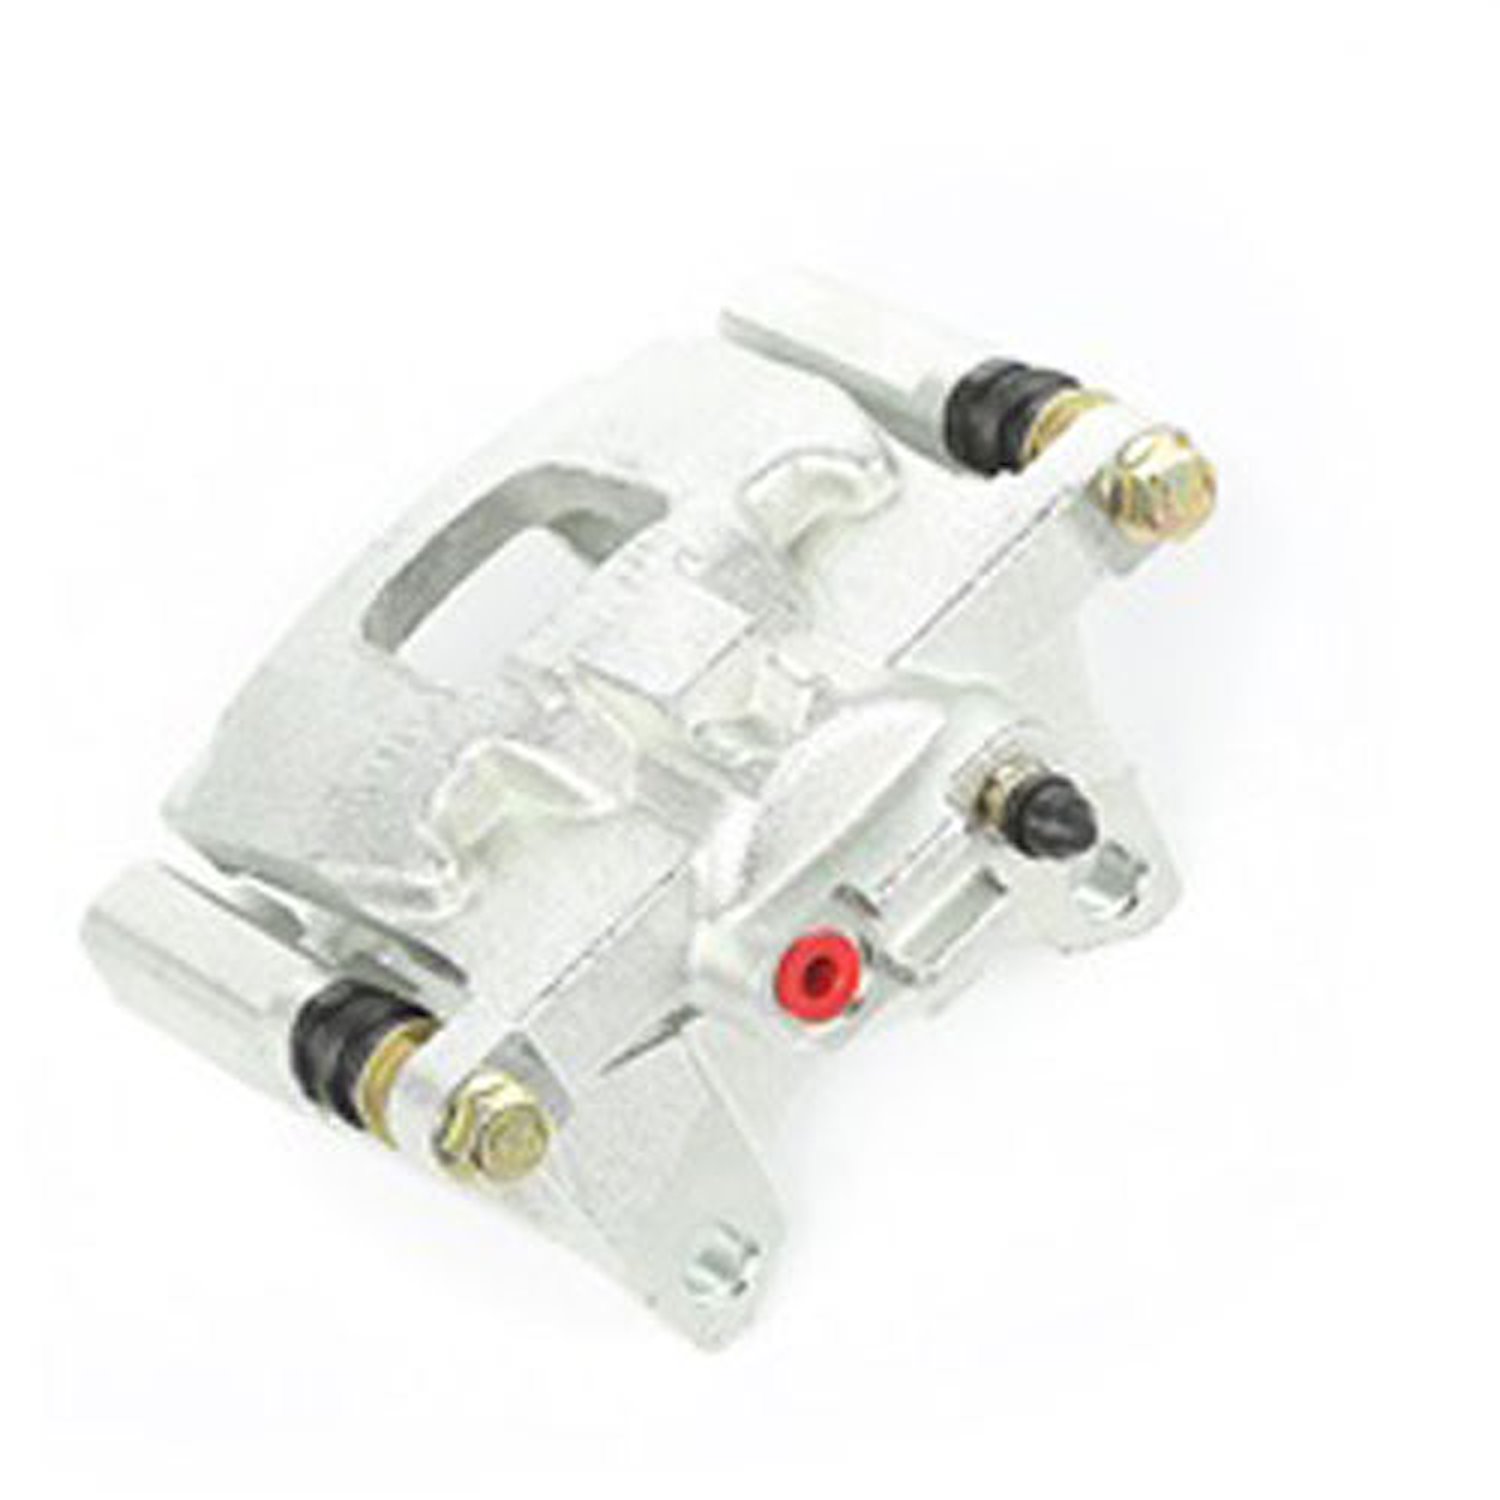 This rear disc brake caliper from Omix-ADA fits the left side on 07-13 Jeep Wranglers and the right side on 08-12 Libertys.